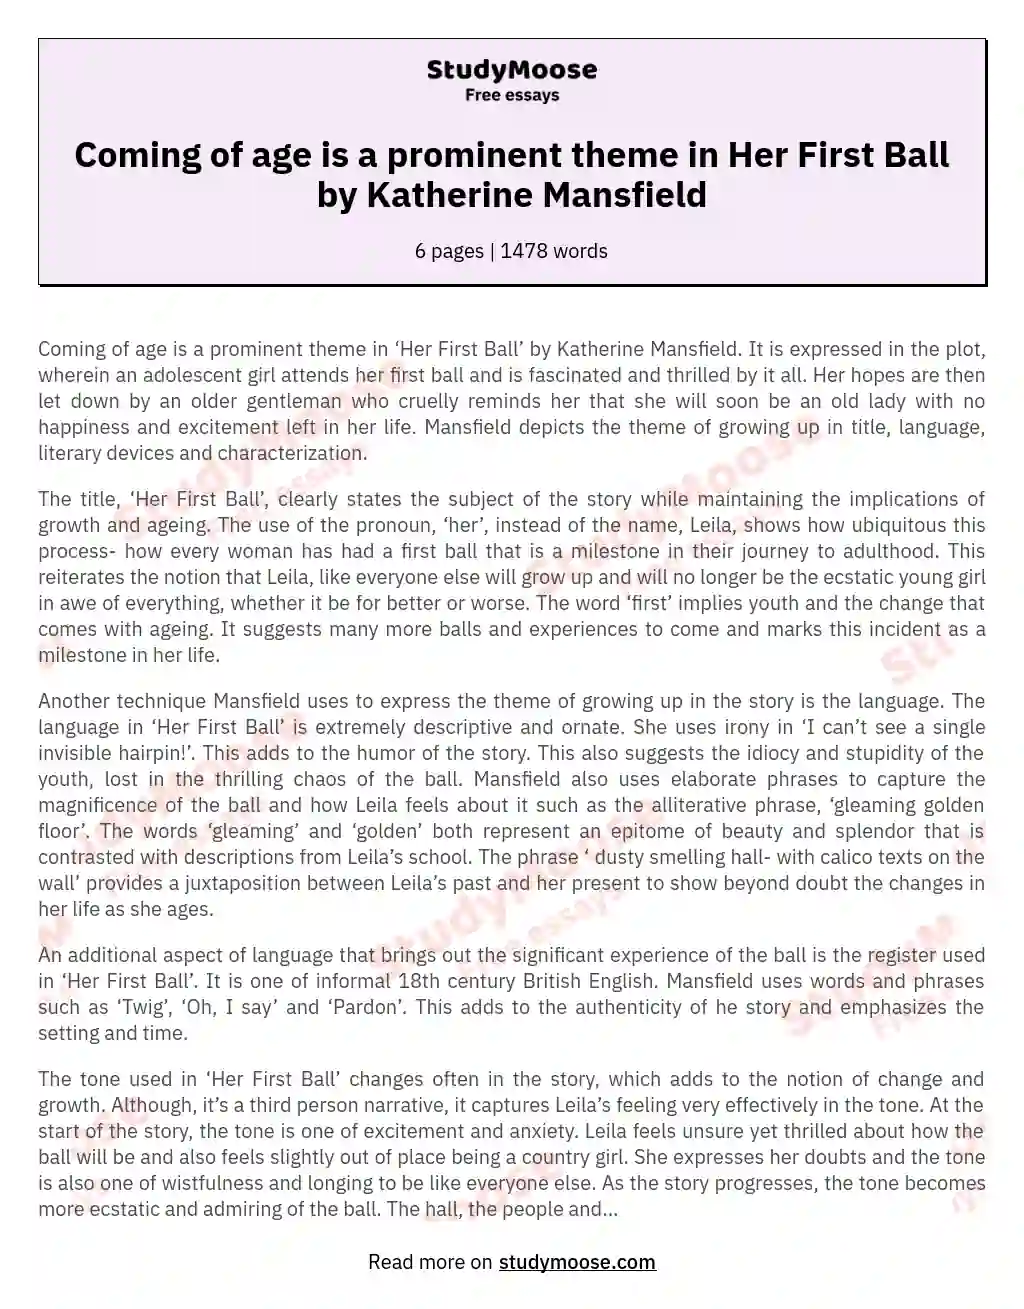 Coming of age is a prominent theme in Her First Ball by Katherine Mansfield essay